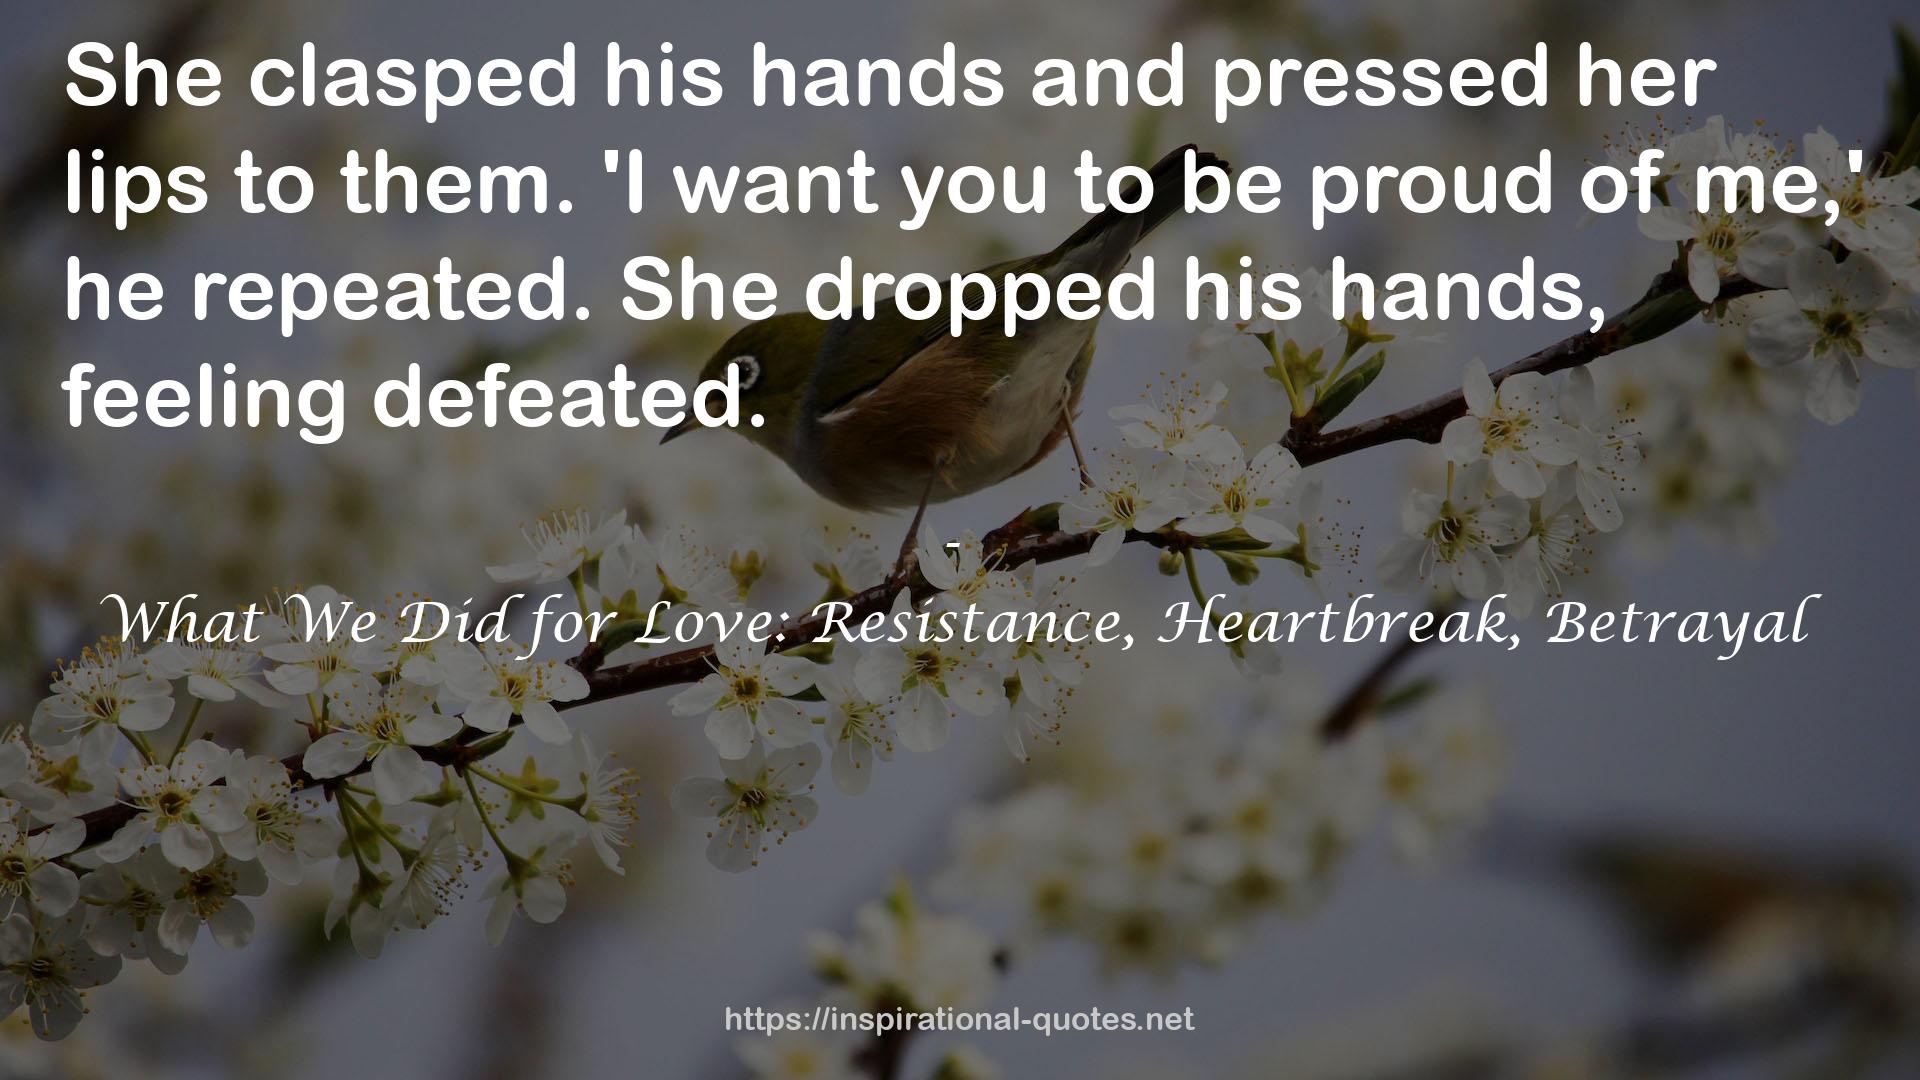 What We Did for Love: Resistance, Heartbreak, Betrayal QUOTES